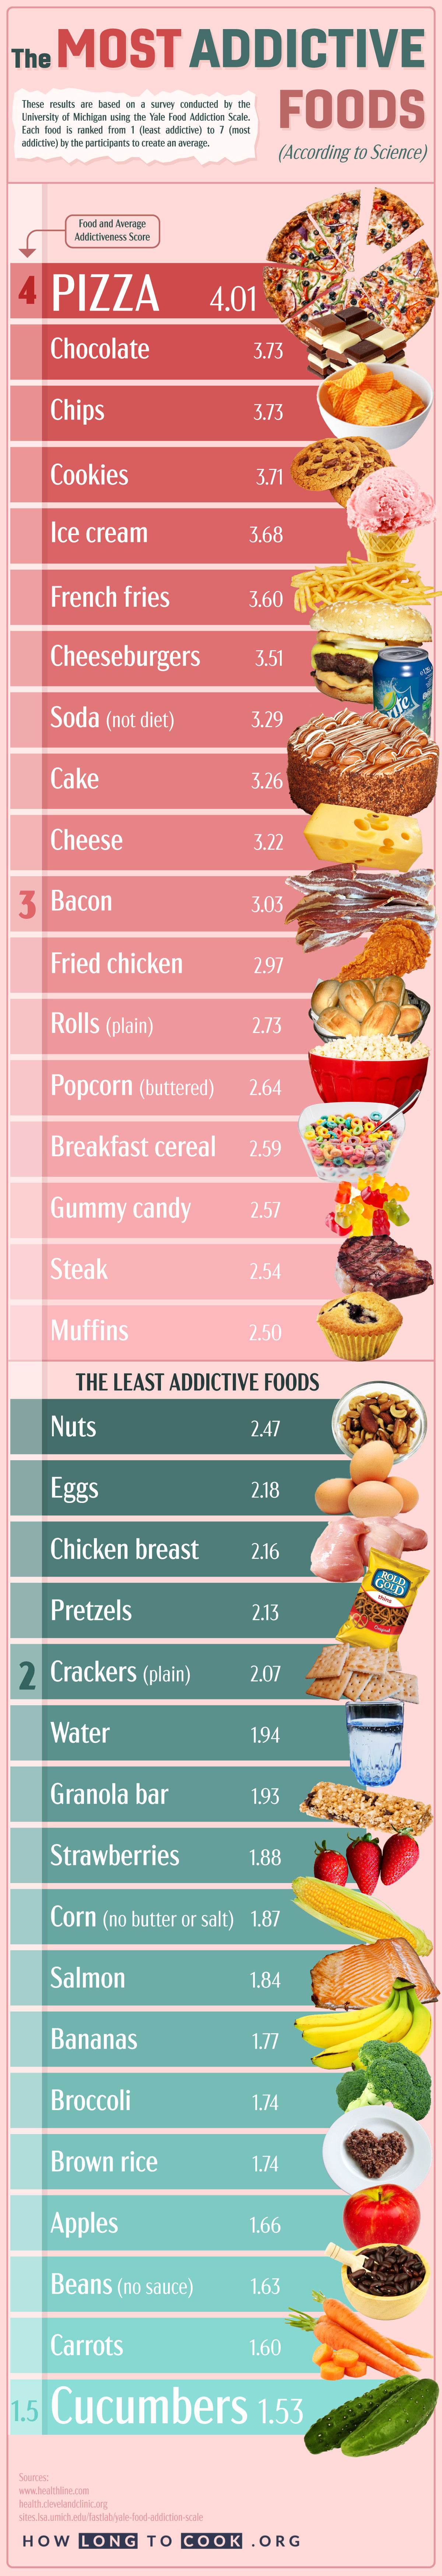 The Most Addictive Foods (According to Science) #infographic